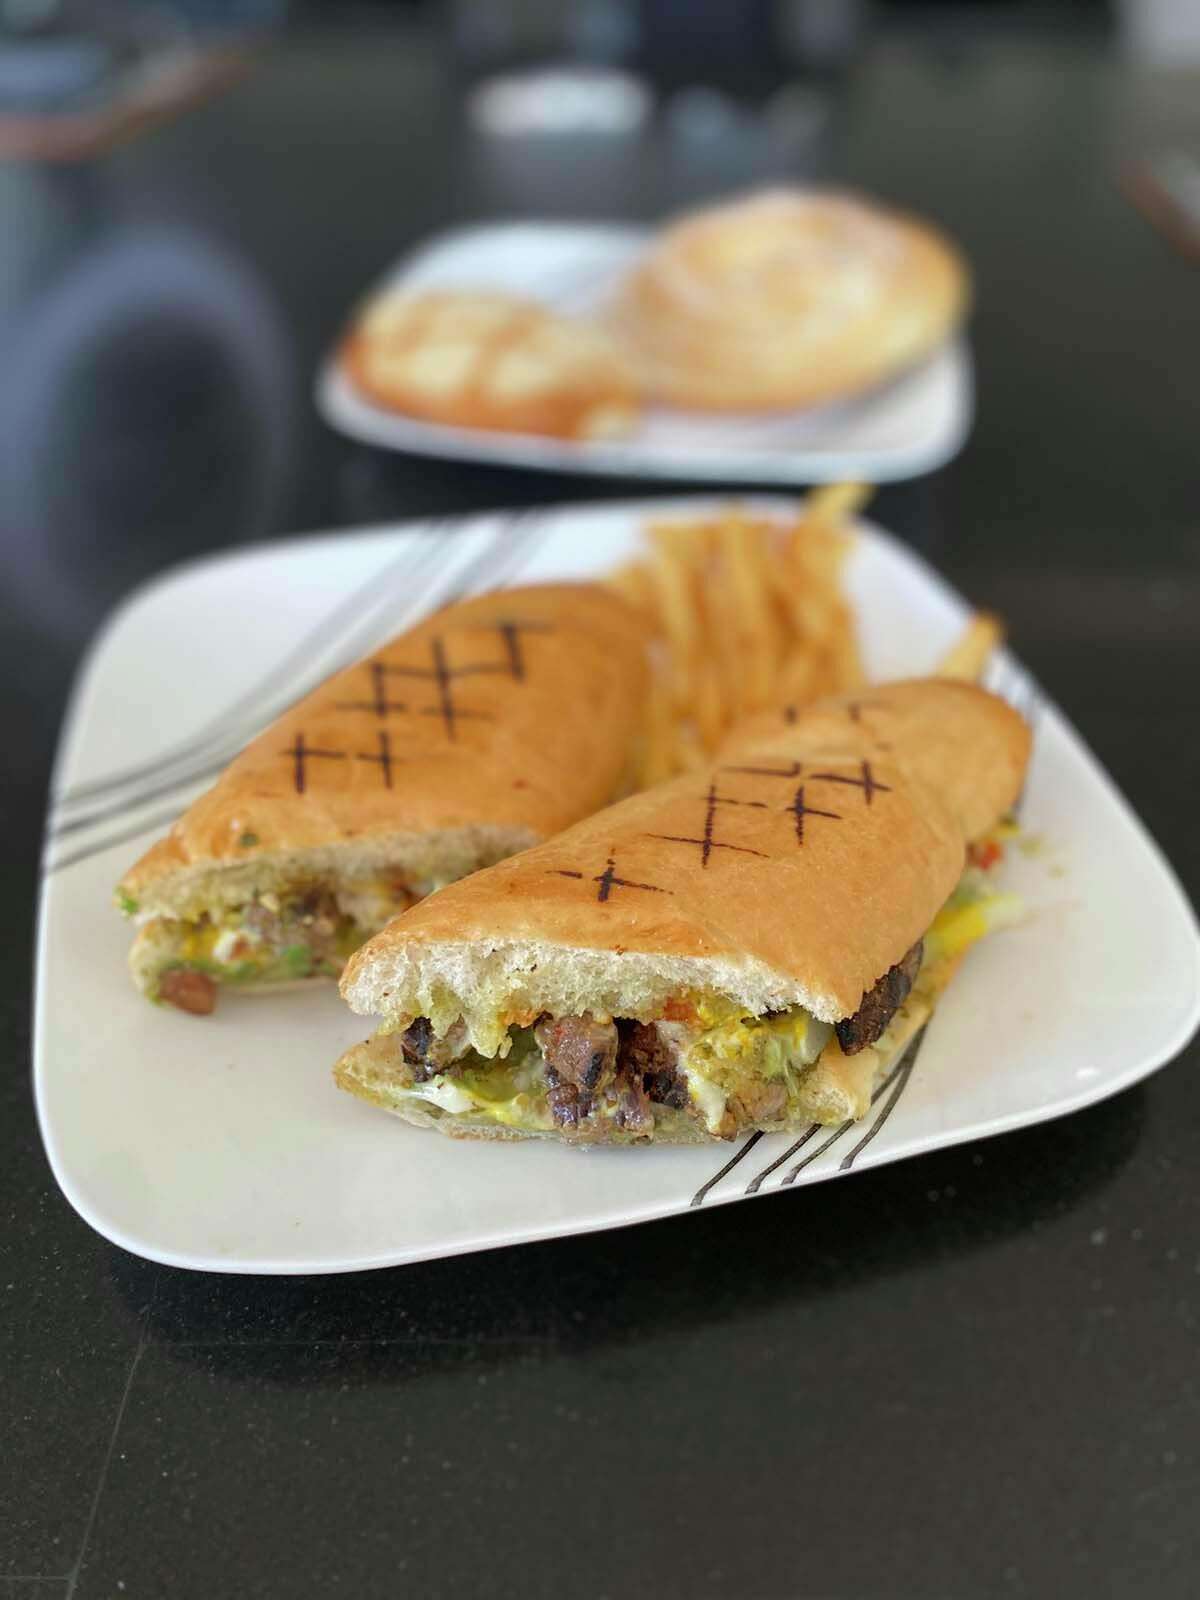 Shucos, or Guatemalan “hot dogs,” are served on freshly baked sub rolls with carne asada, grilled chicken or chorizo, along with chimichurri, avocado, cabbage salad, ketchup, mayo and mustard.